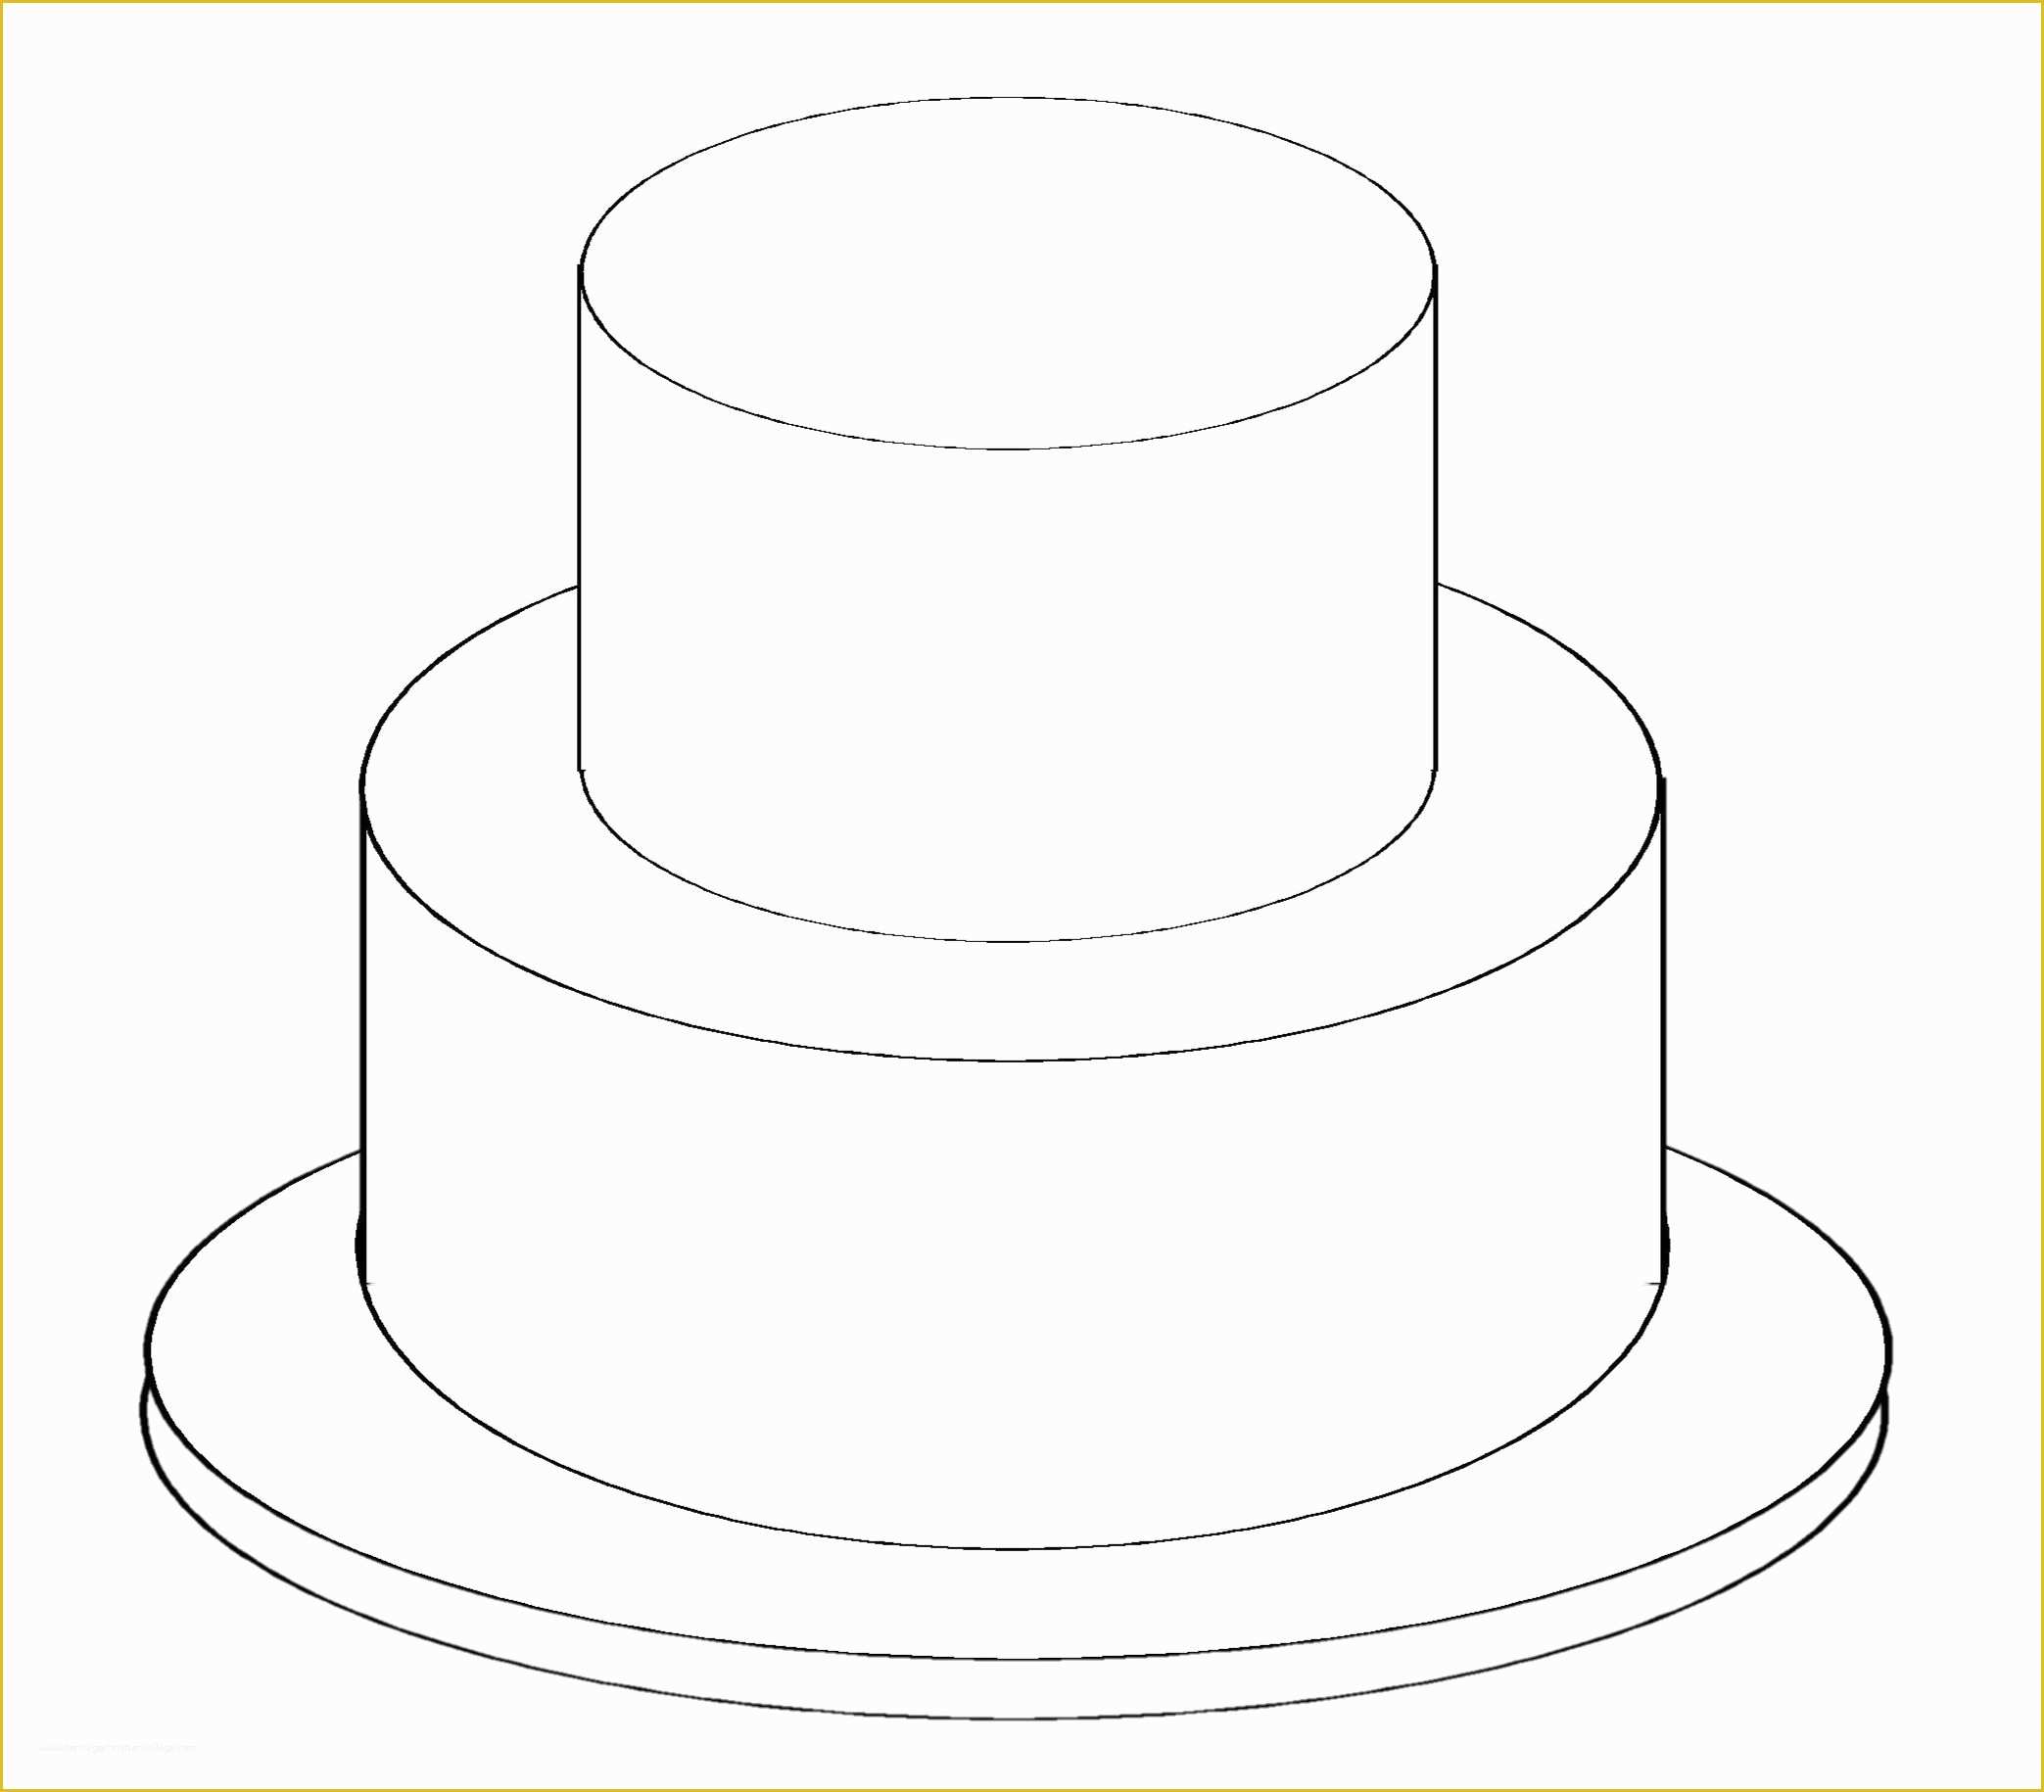 Free Printable Cake Templates Of Wedding Cake Clipart Blank Pencil and In Color Wedding